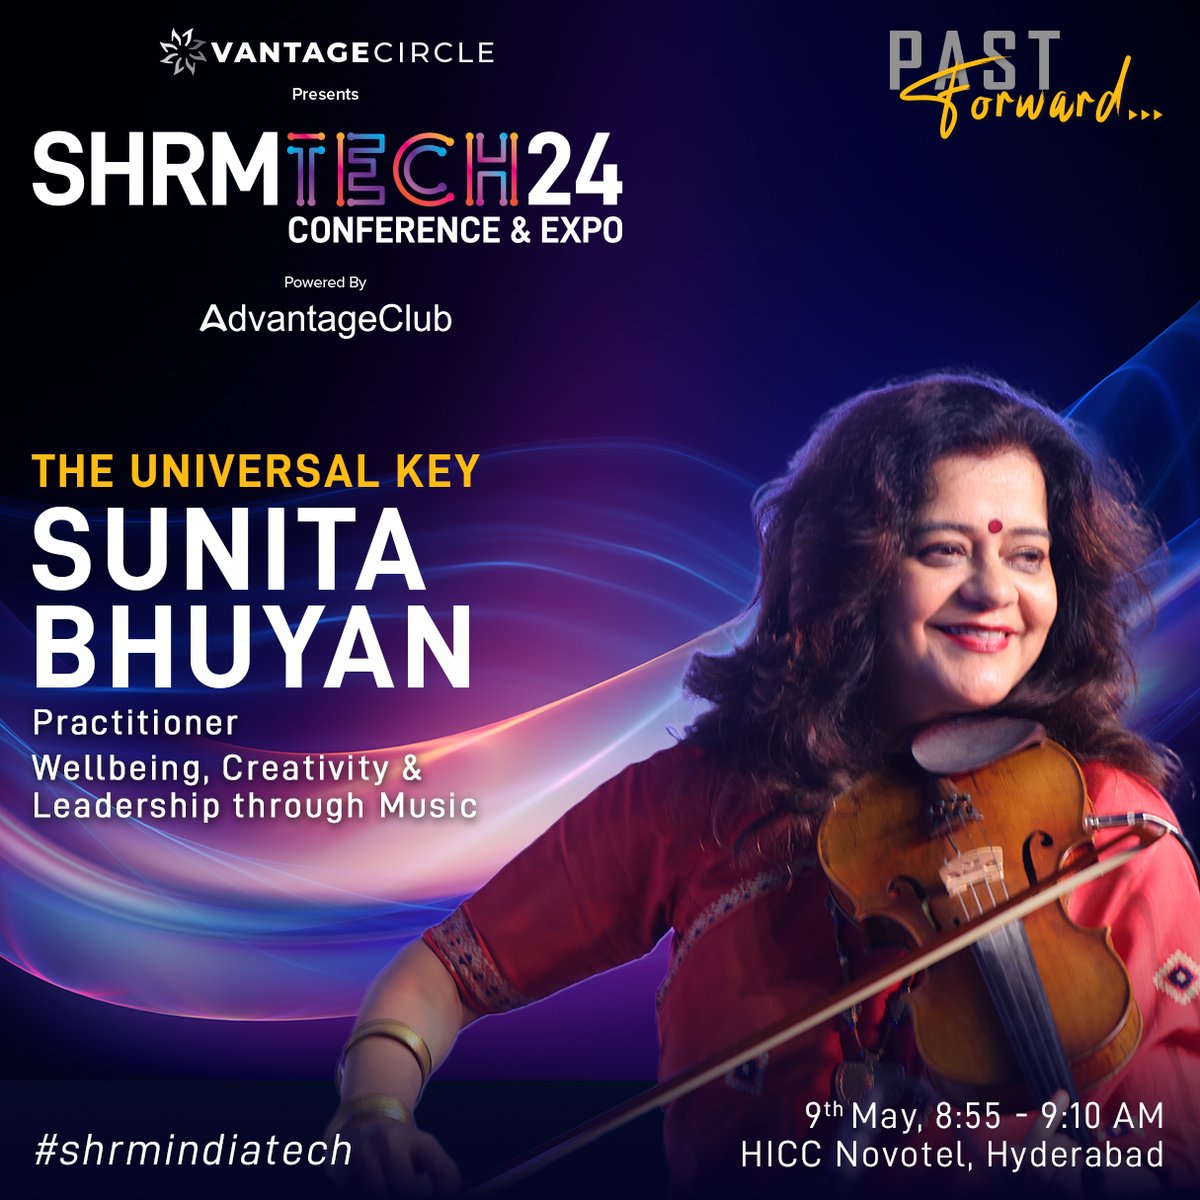 Thrilled to announce that Sunita Bhuyan, a renowned practitioner of Well-being, Creativity & Leadership through Music, will be gracing our conference with her music. Join us to delve into the harmonious intersection of music and leadership, and explore how creativity can…